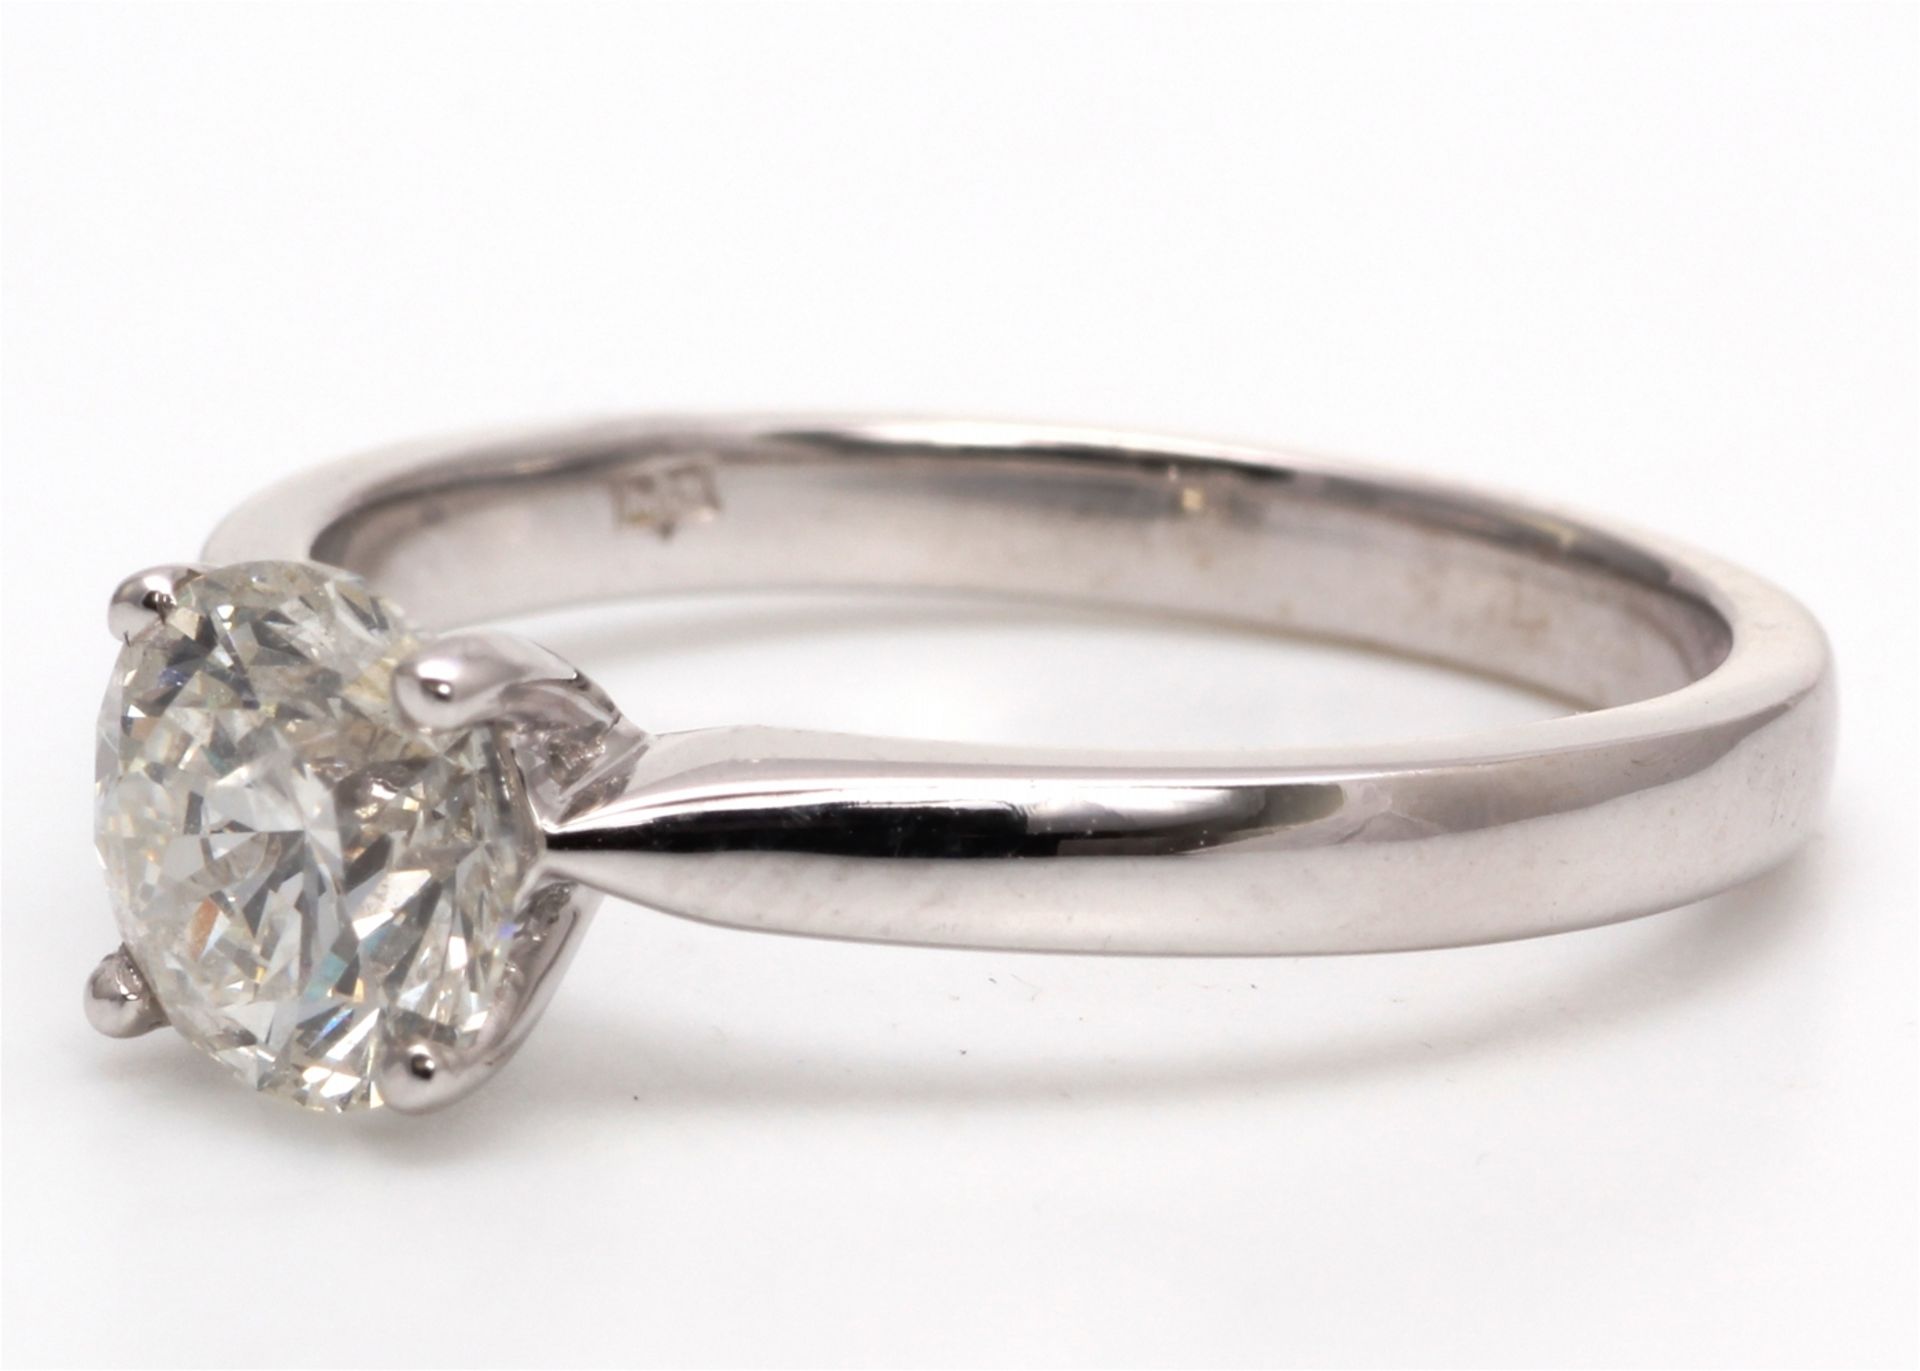 18ct White Gold Single Stone Diamond Ring 1.05 Carats - Valued By AGI £20,590.12 - A gorgeous - Image 2 of 5